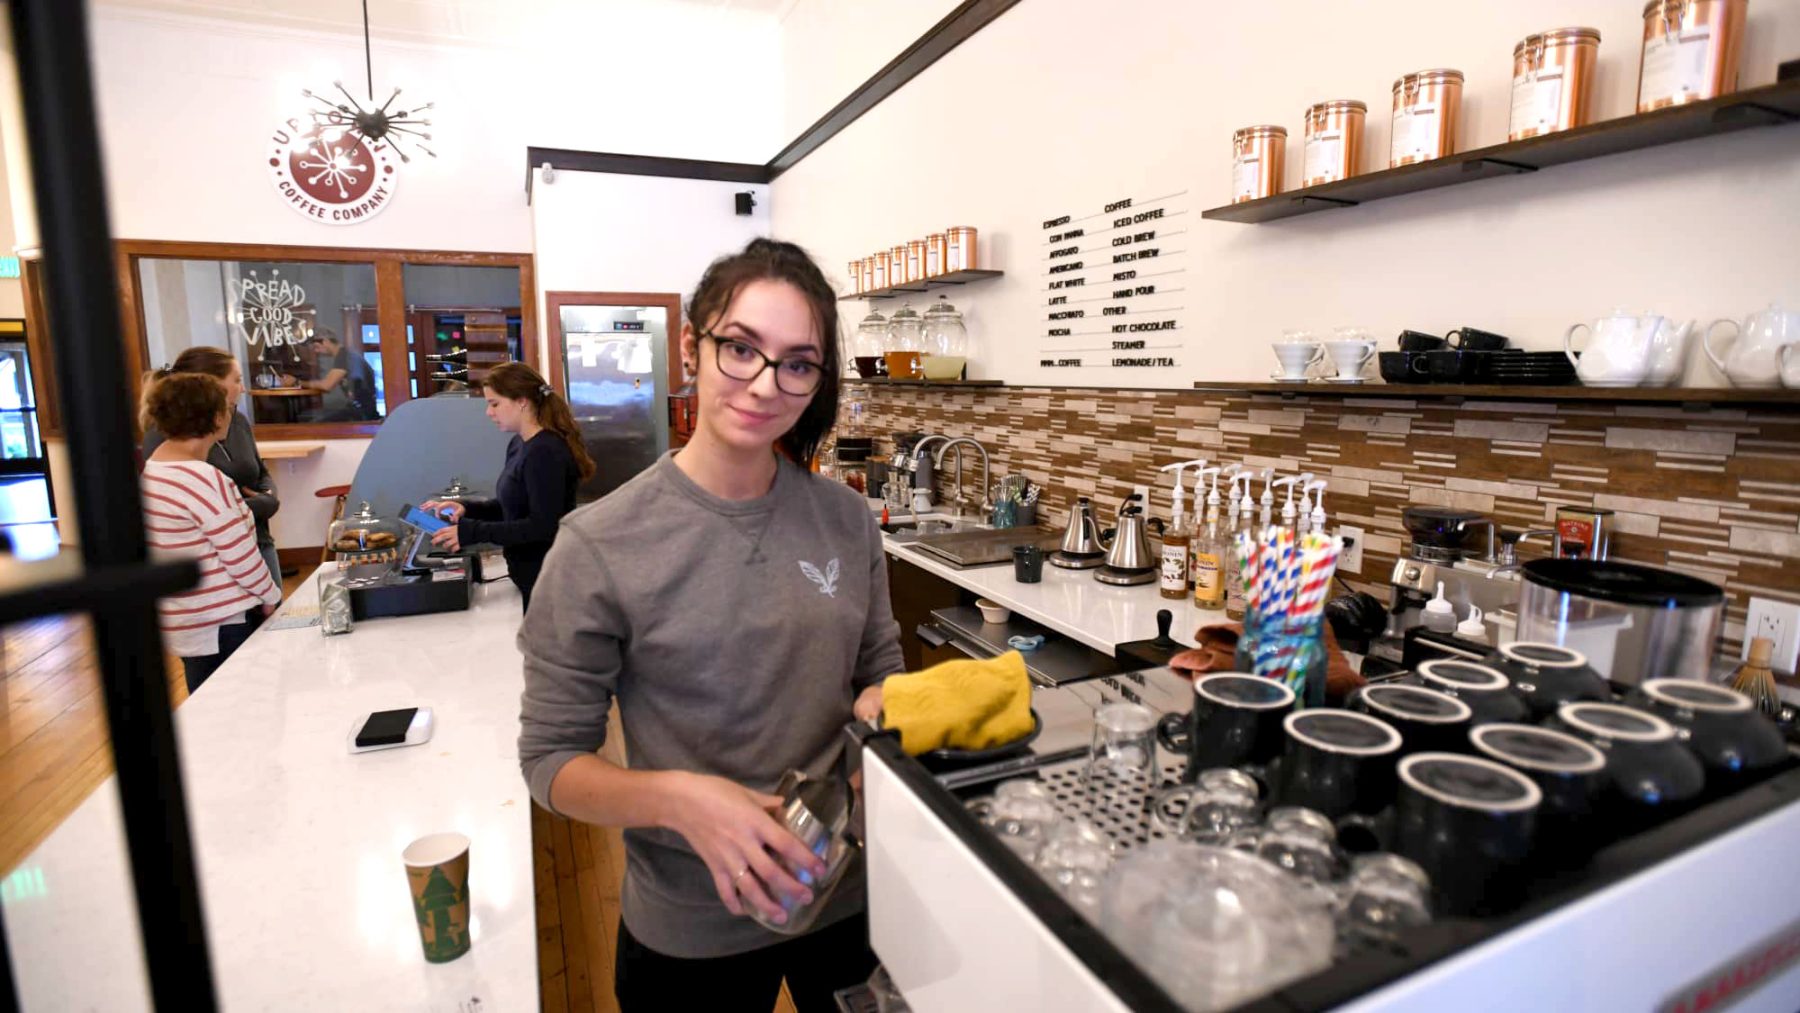 Article: Warm up at these coffee shops & cafes | Barista at Uptown Coffee Company Marshfield WI